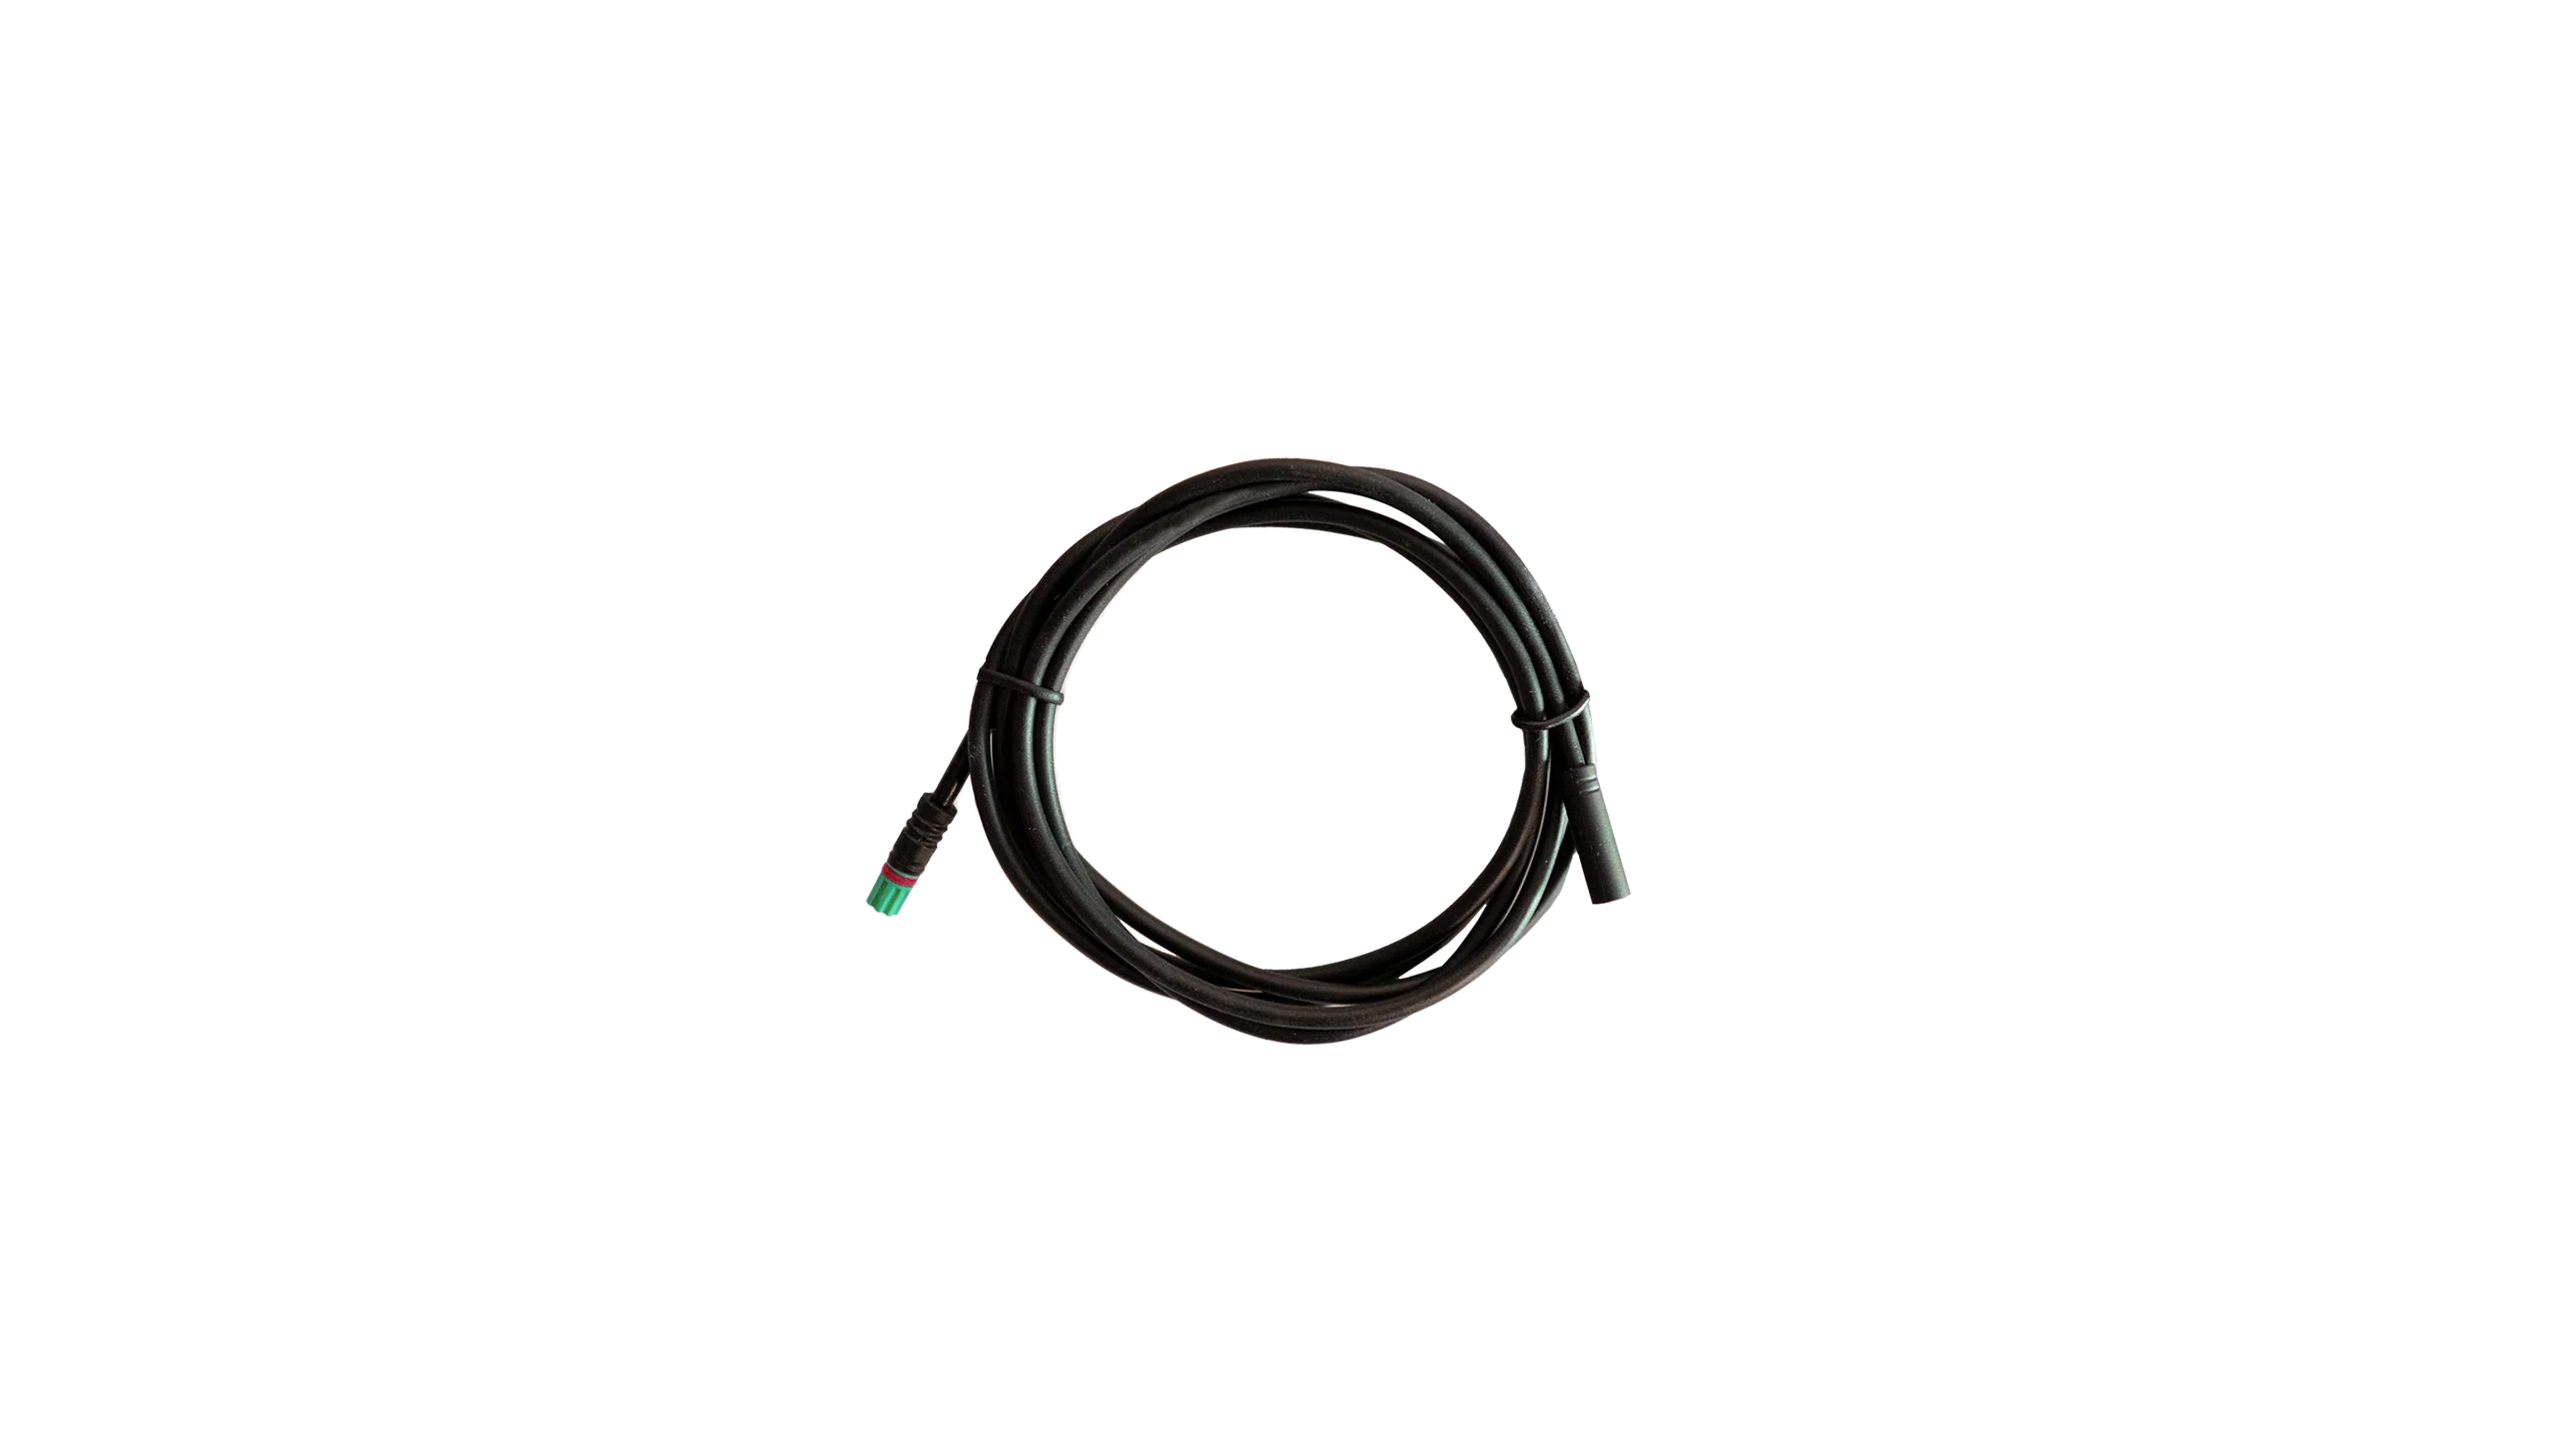 Supernova Power Connector Cable - Bosch Smart System (Low Power Port) 1300mm